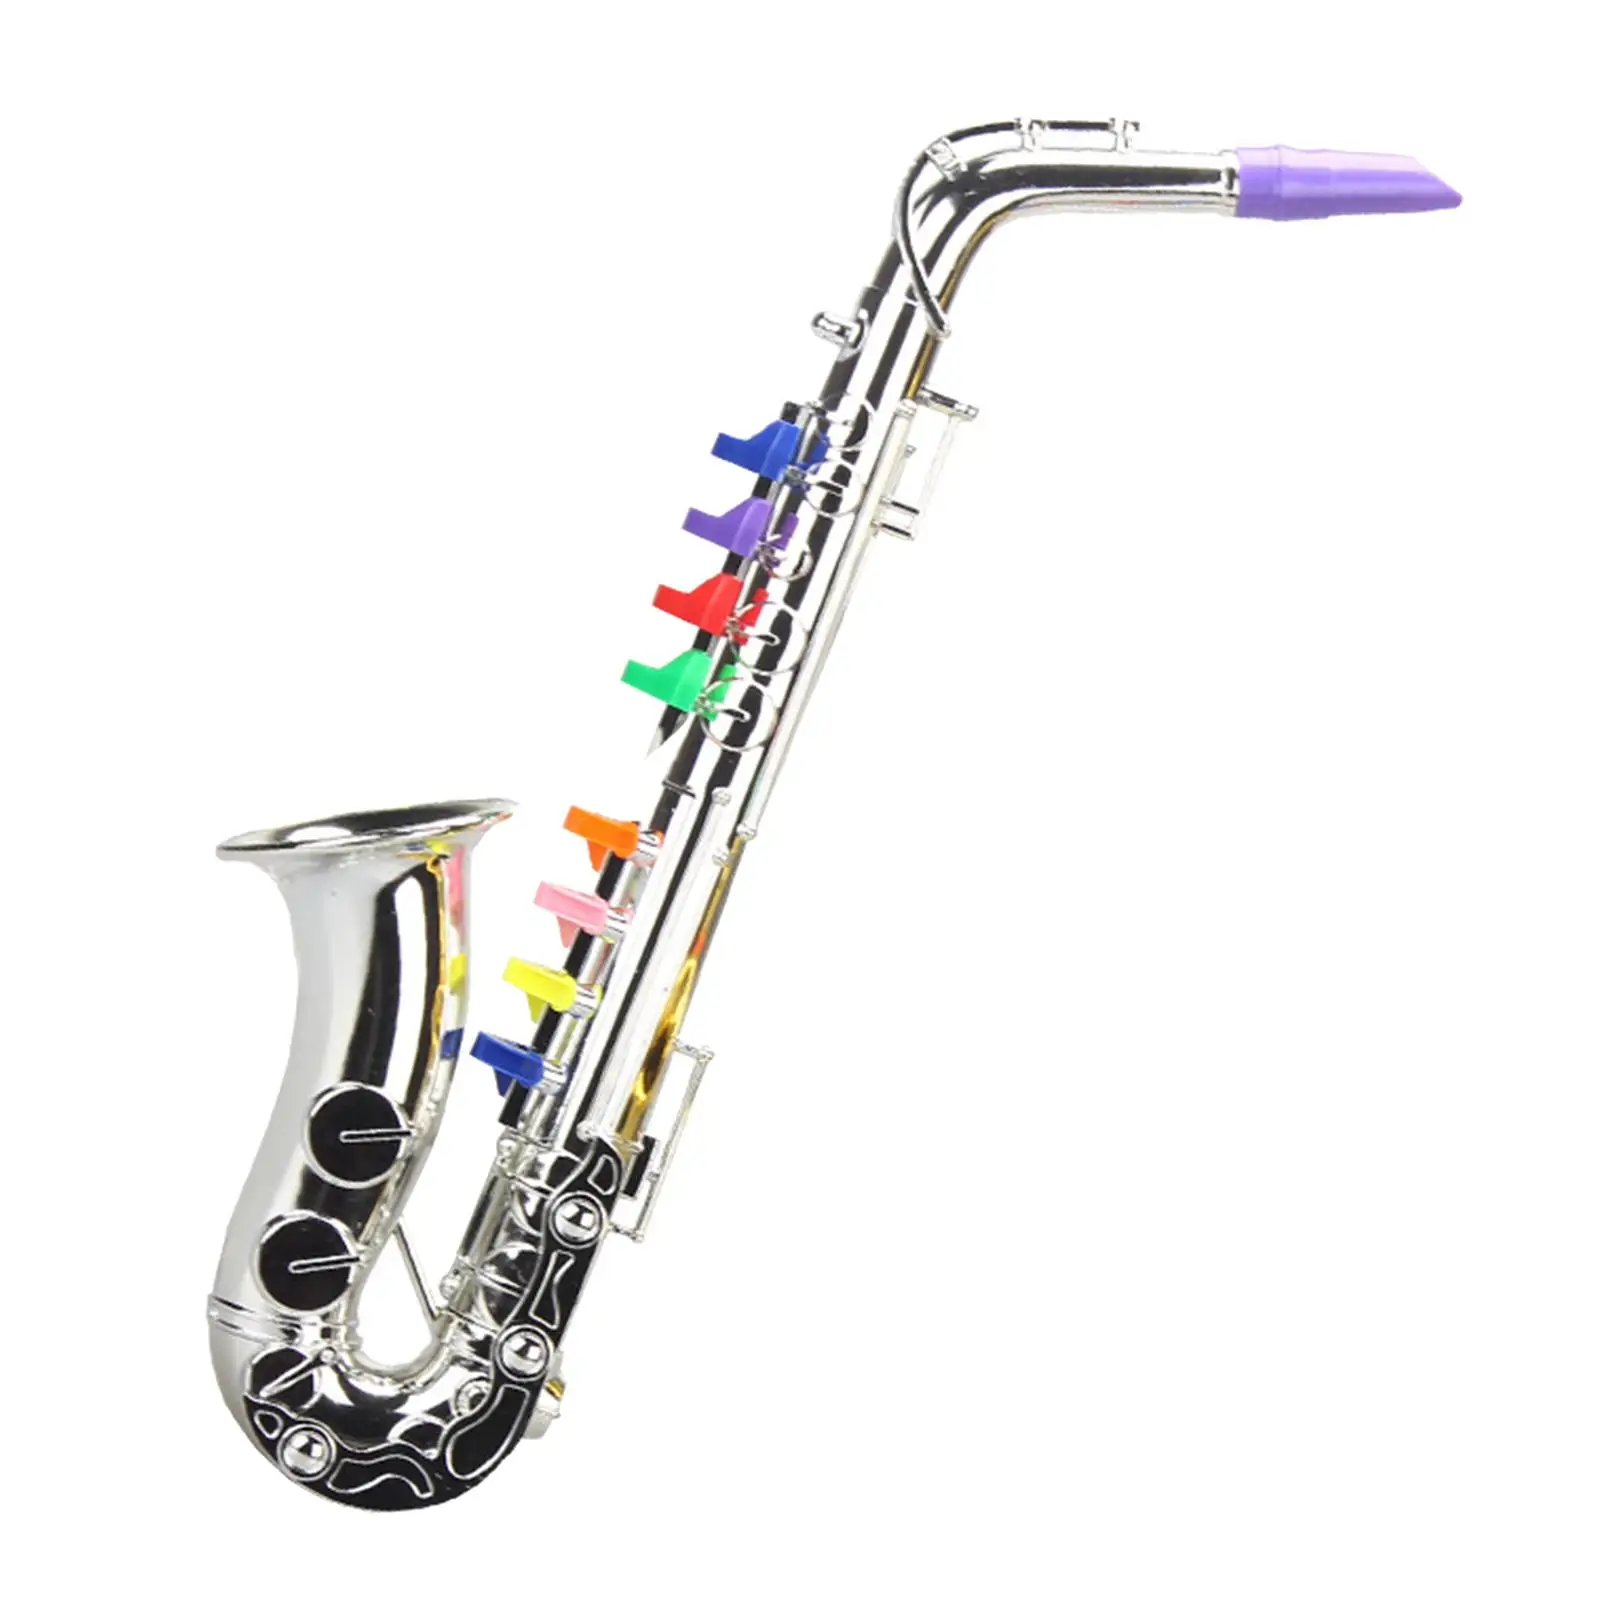 Musical ABS Saxophone Mini 8 Notes Play Musical Instrument with Color Keys for Party Children Ages 3+ Preschool